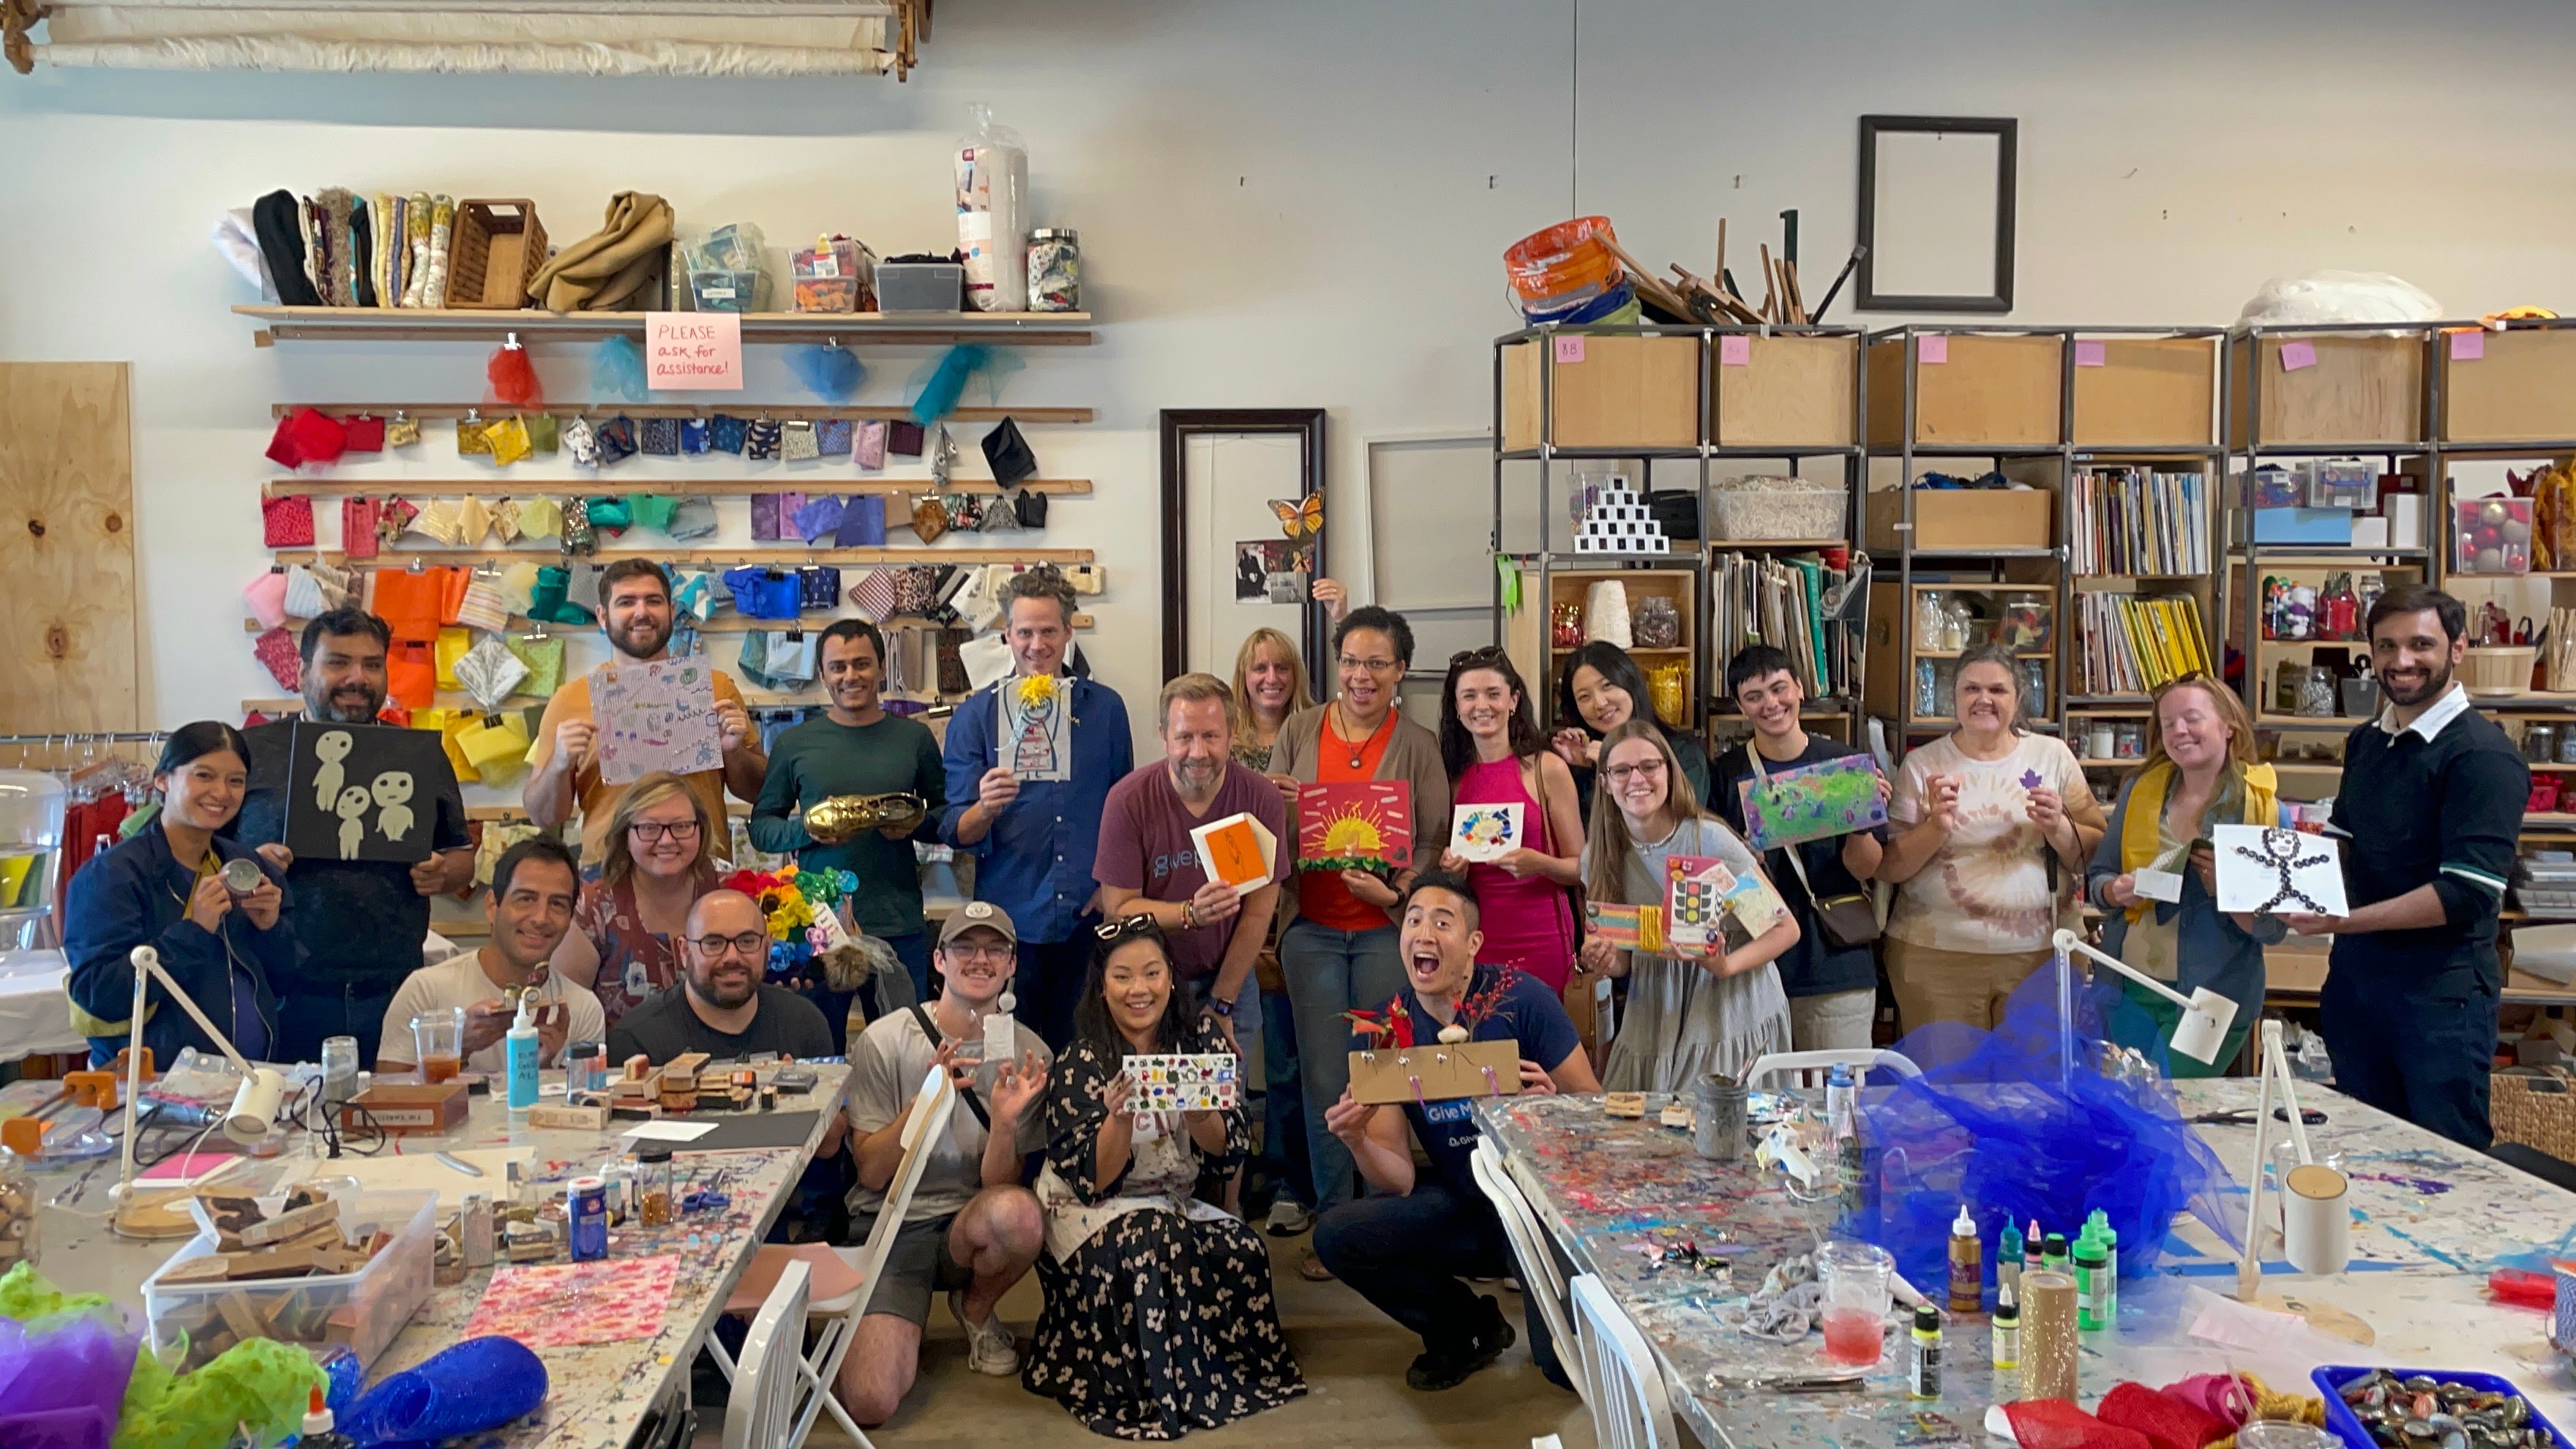 GivePulse team members smiling while on the '22 company retreat. The GivePulse team is holding up pieces of art they made while in Austin Texas.